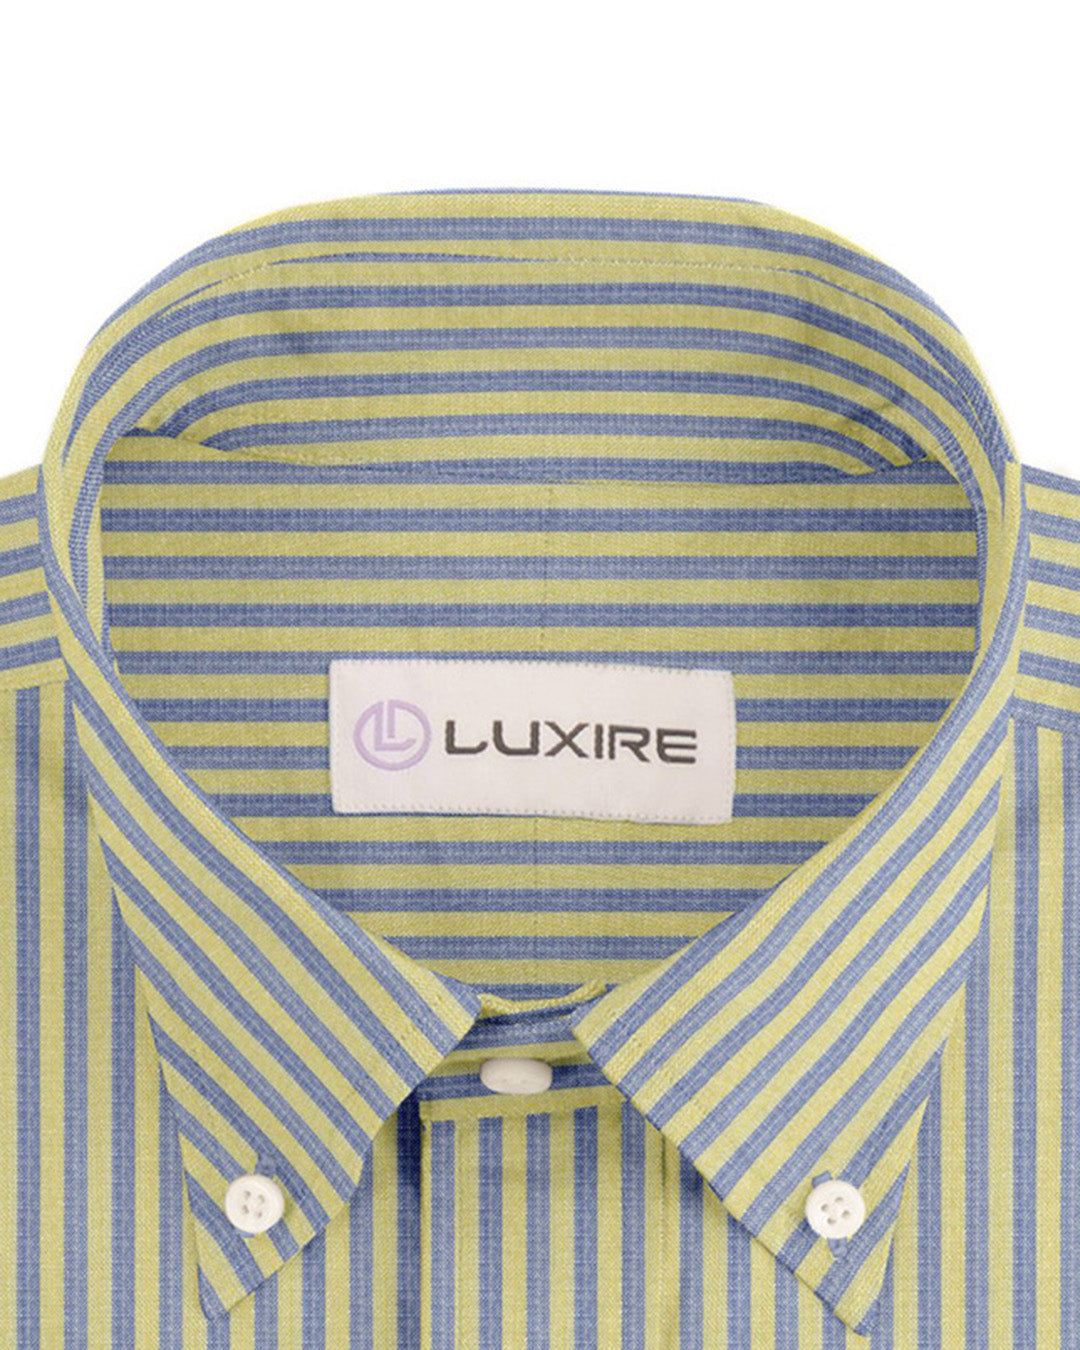 Collar of custom linen shirt for men in yellow and blue dress stripes